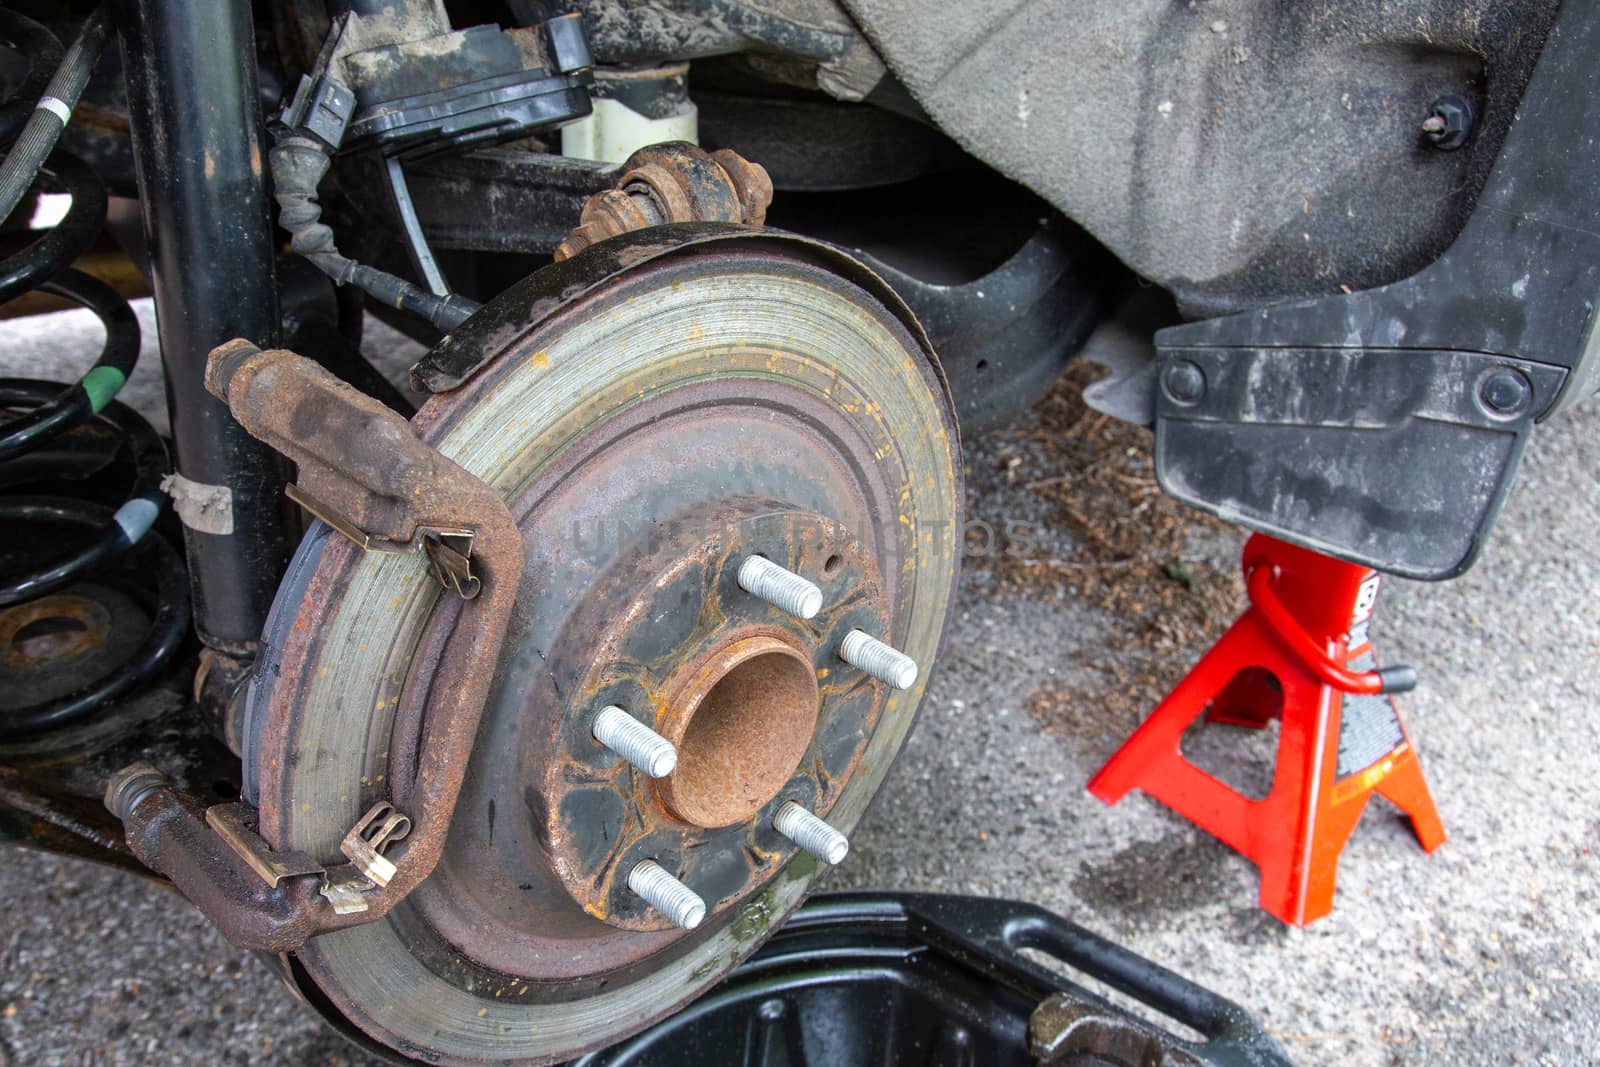 Brake work is being done on a car in a driveway. The vehicle hoisted up on a red jack with an exposed rear wheel, rusted rotor and removed brake caliper.